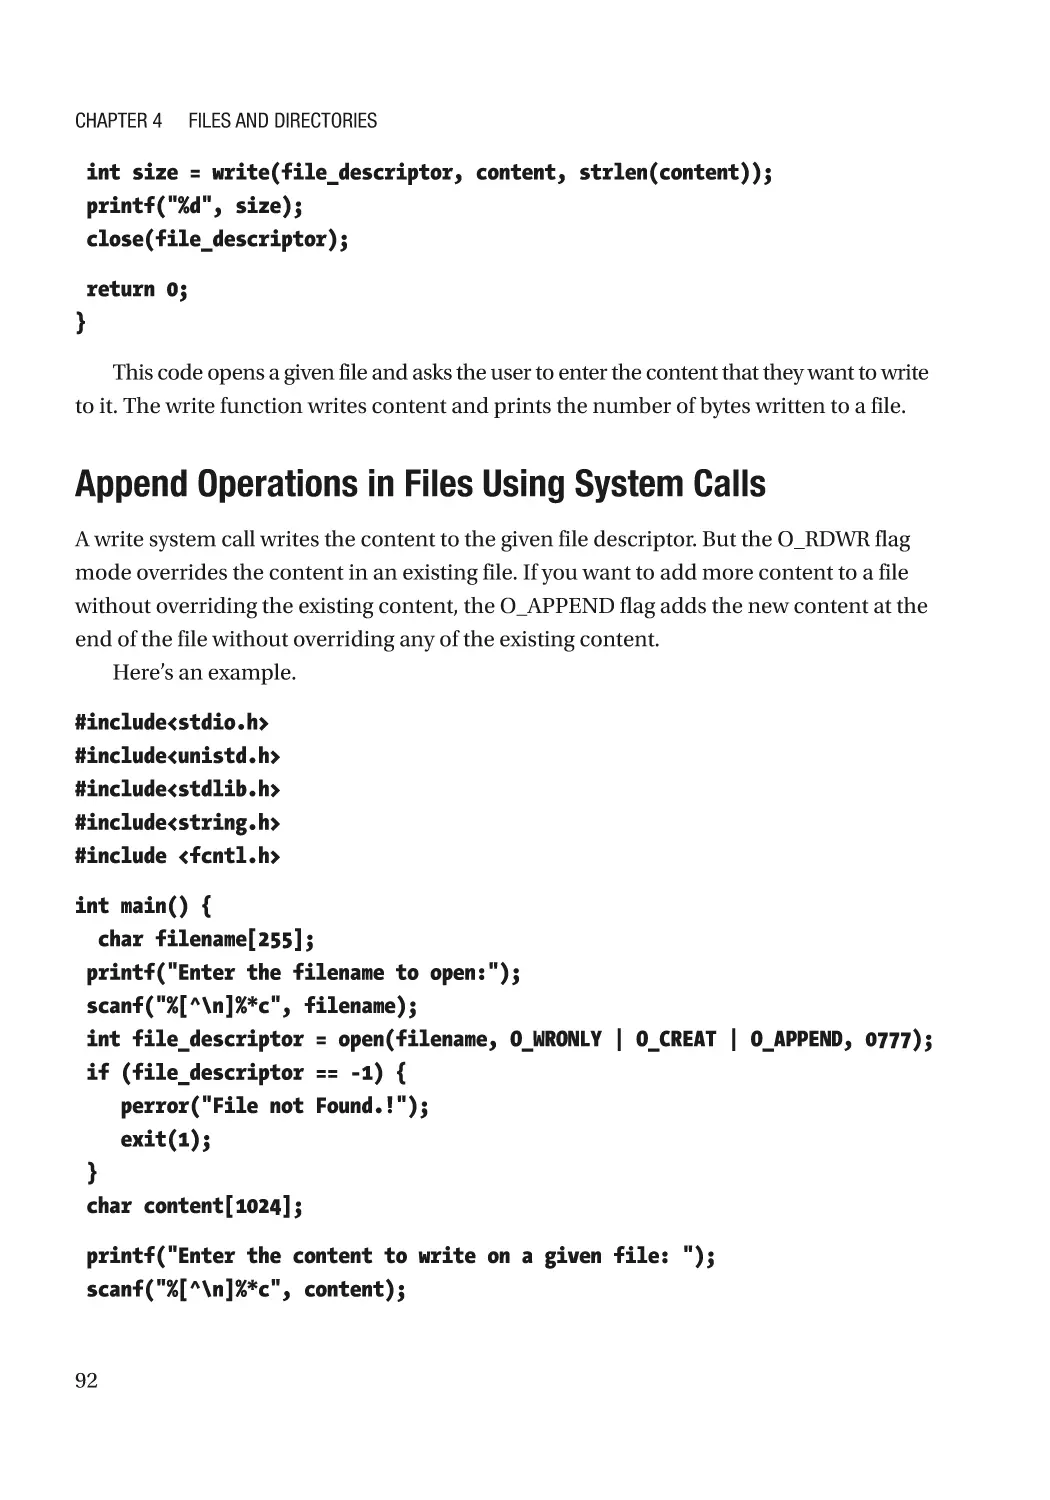 Append Operations in Files Using System Calls